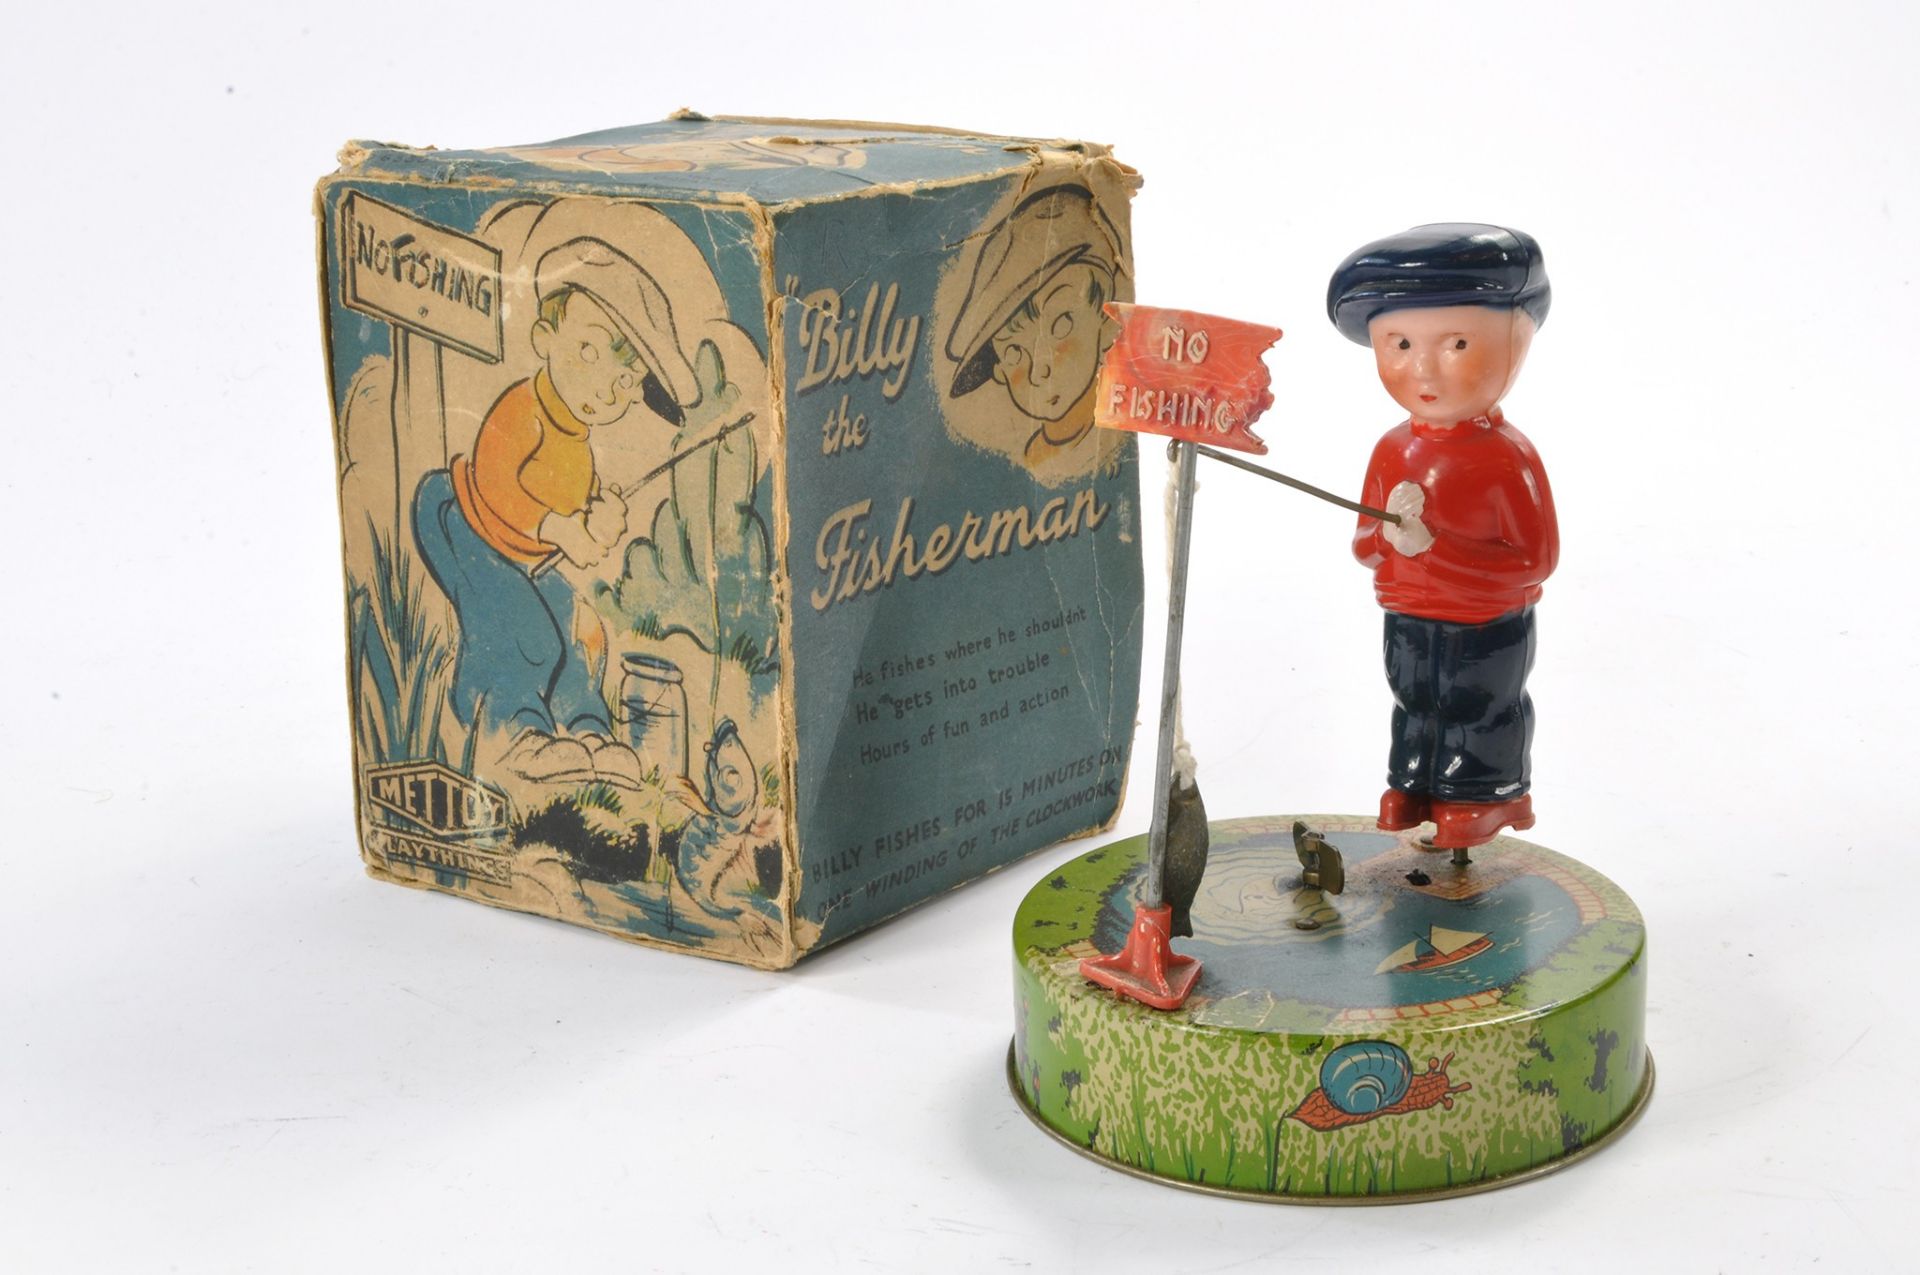 Mettoy Playthings Mechanical Tinplate issue comprising Billy the Fisherman. In good working order